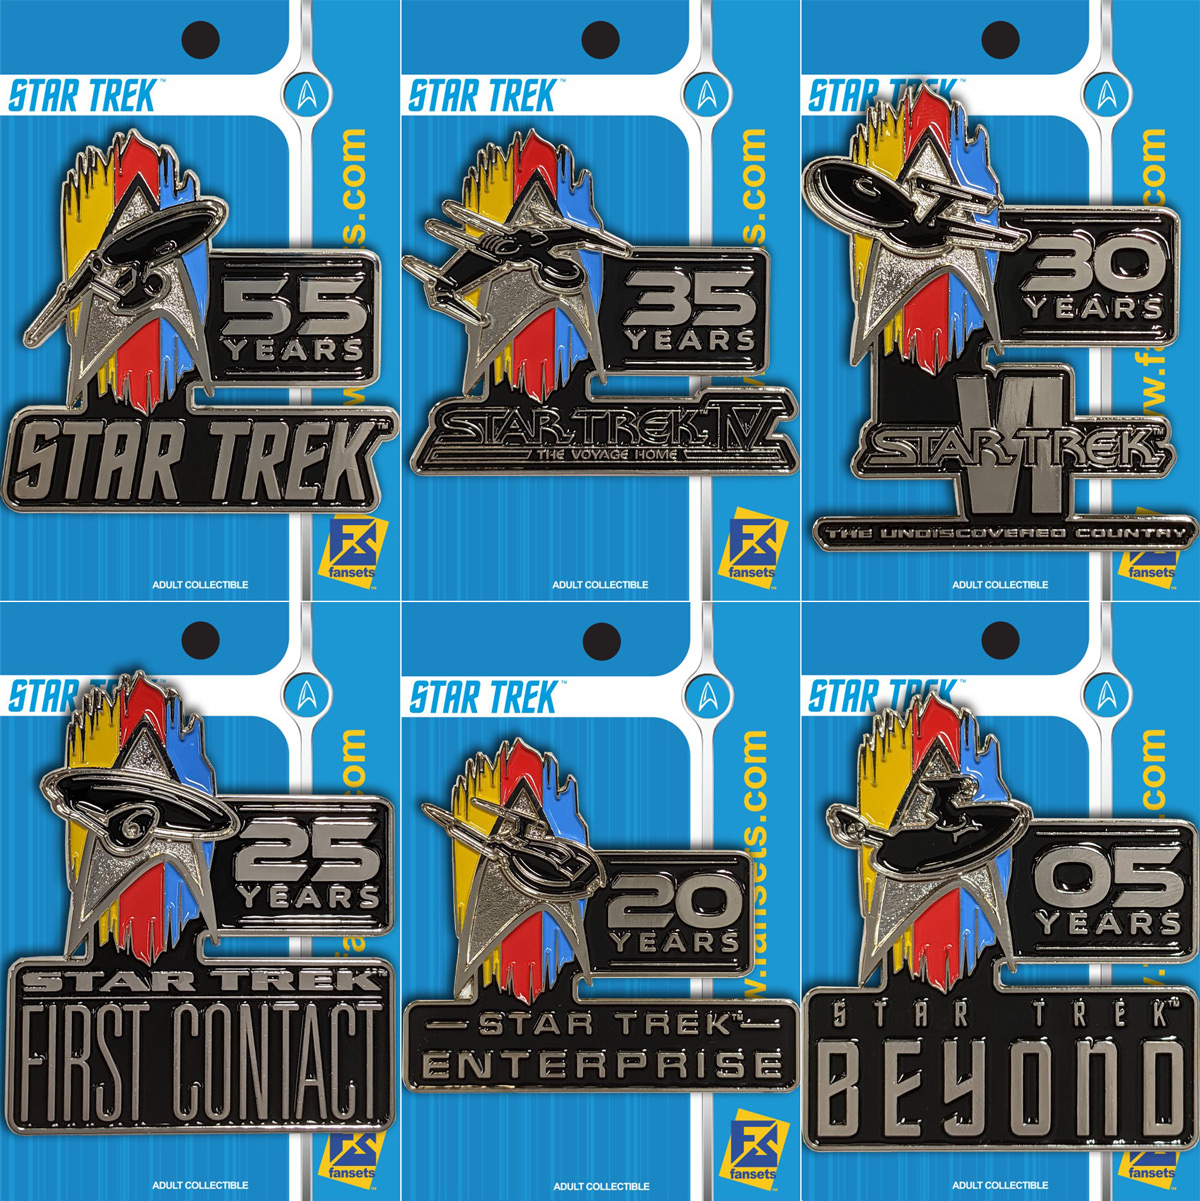 Star Trek SERIES THE NEXT GENERATION Licensed FanSets Logo Collector’s Pin 